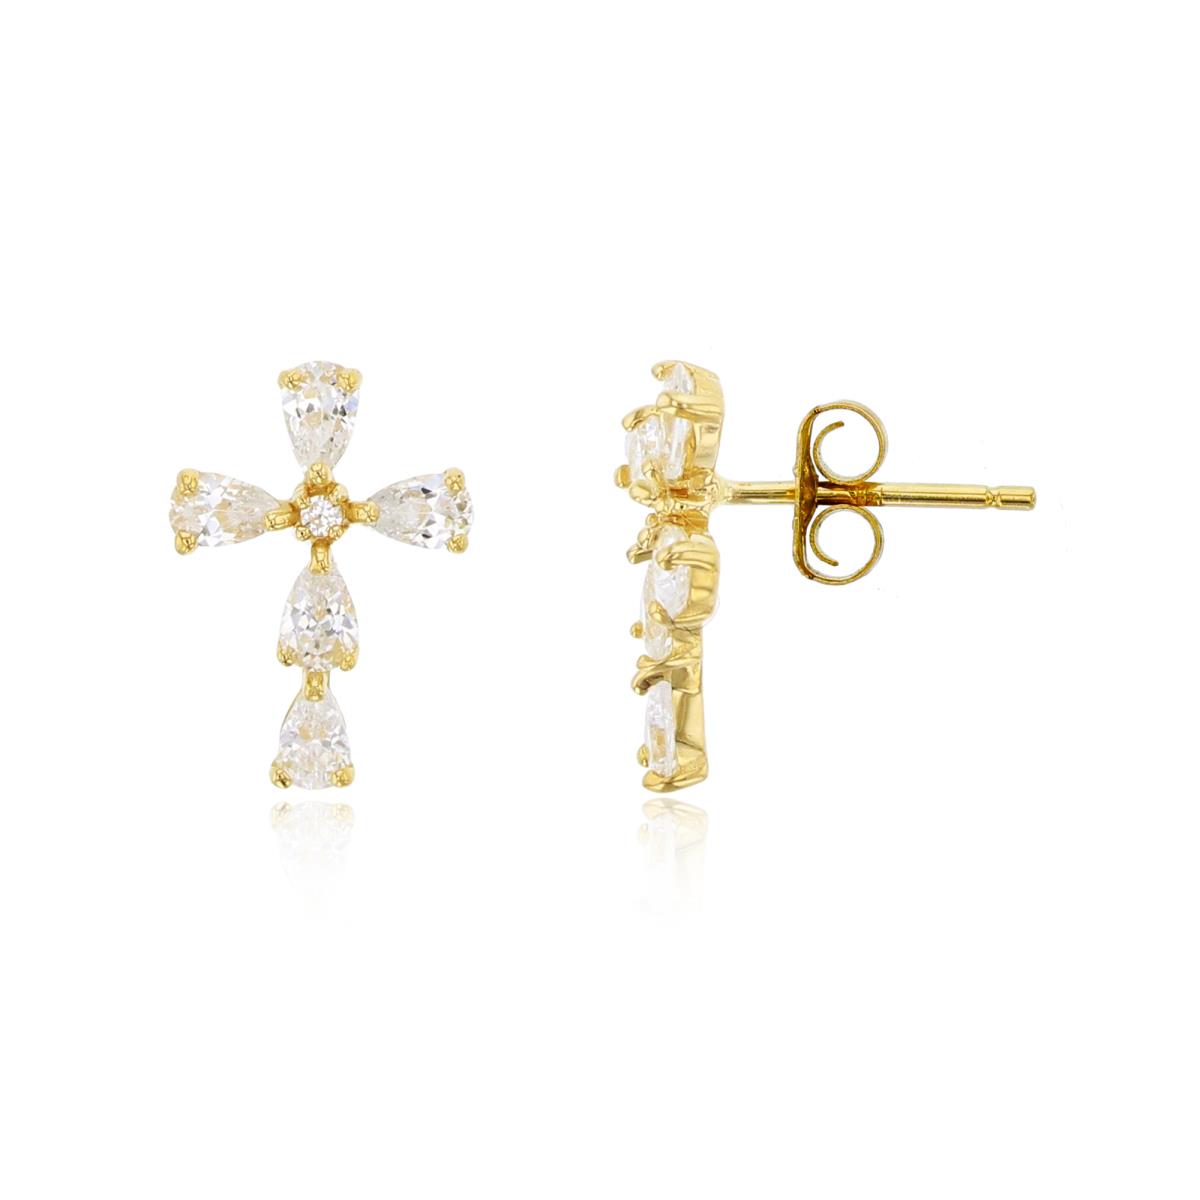 14K Yellow Gold Rnd & PS CZ Cross Stud Earring with 4.5mm Clutch